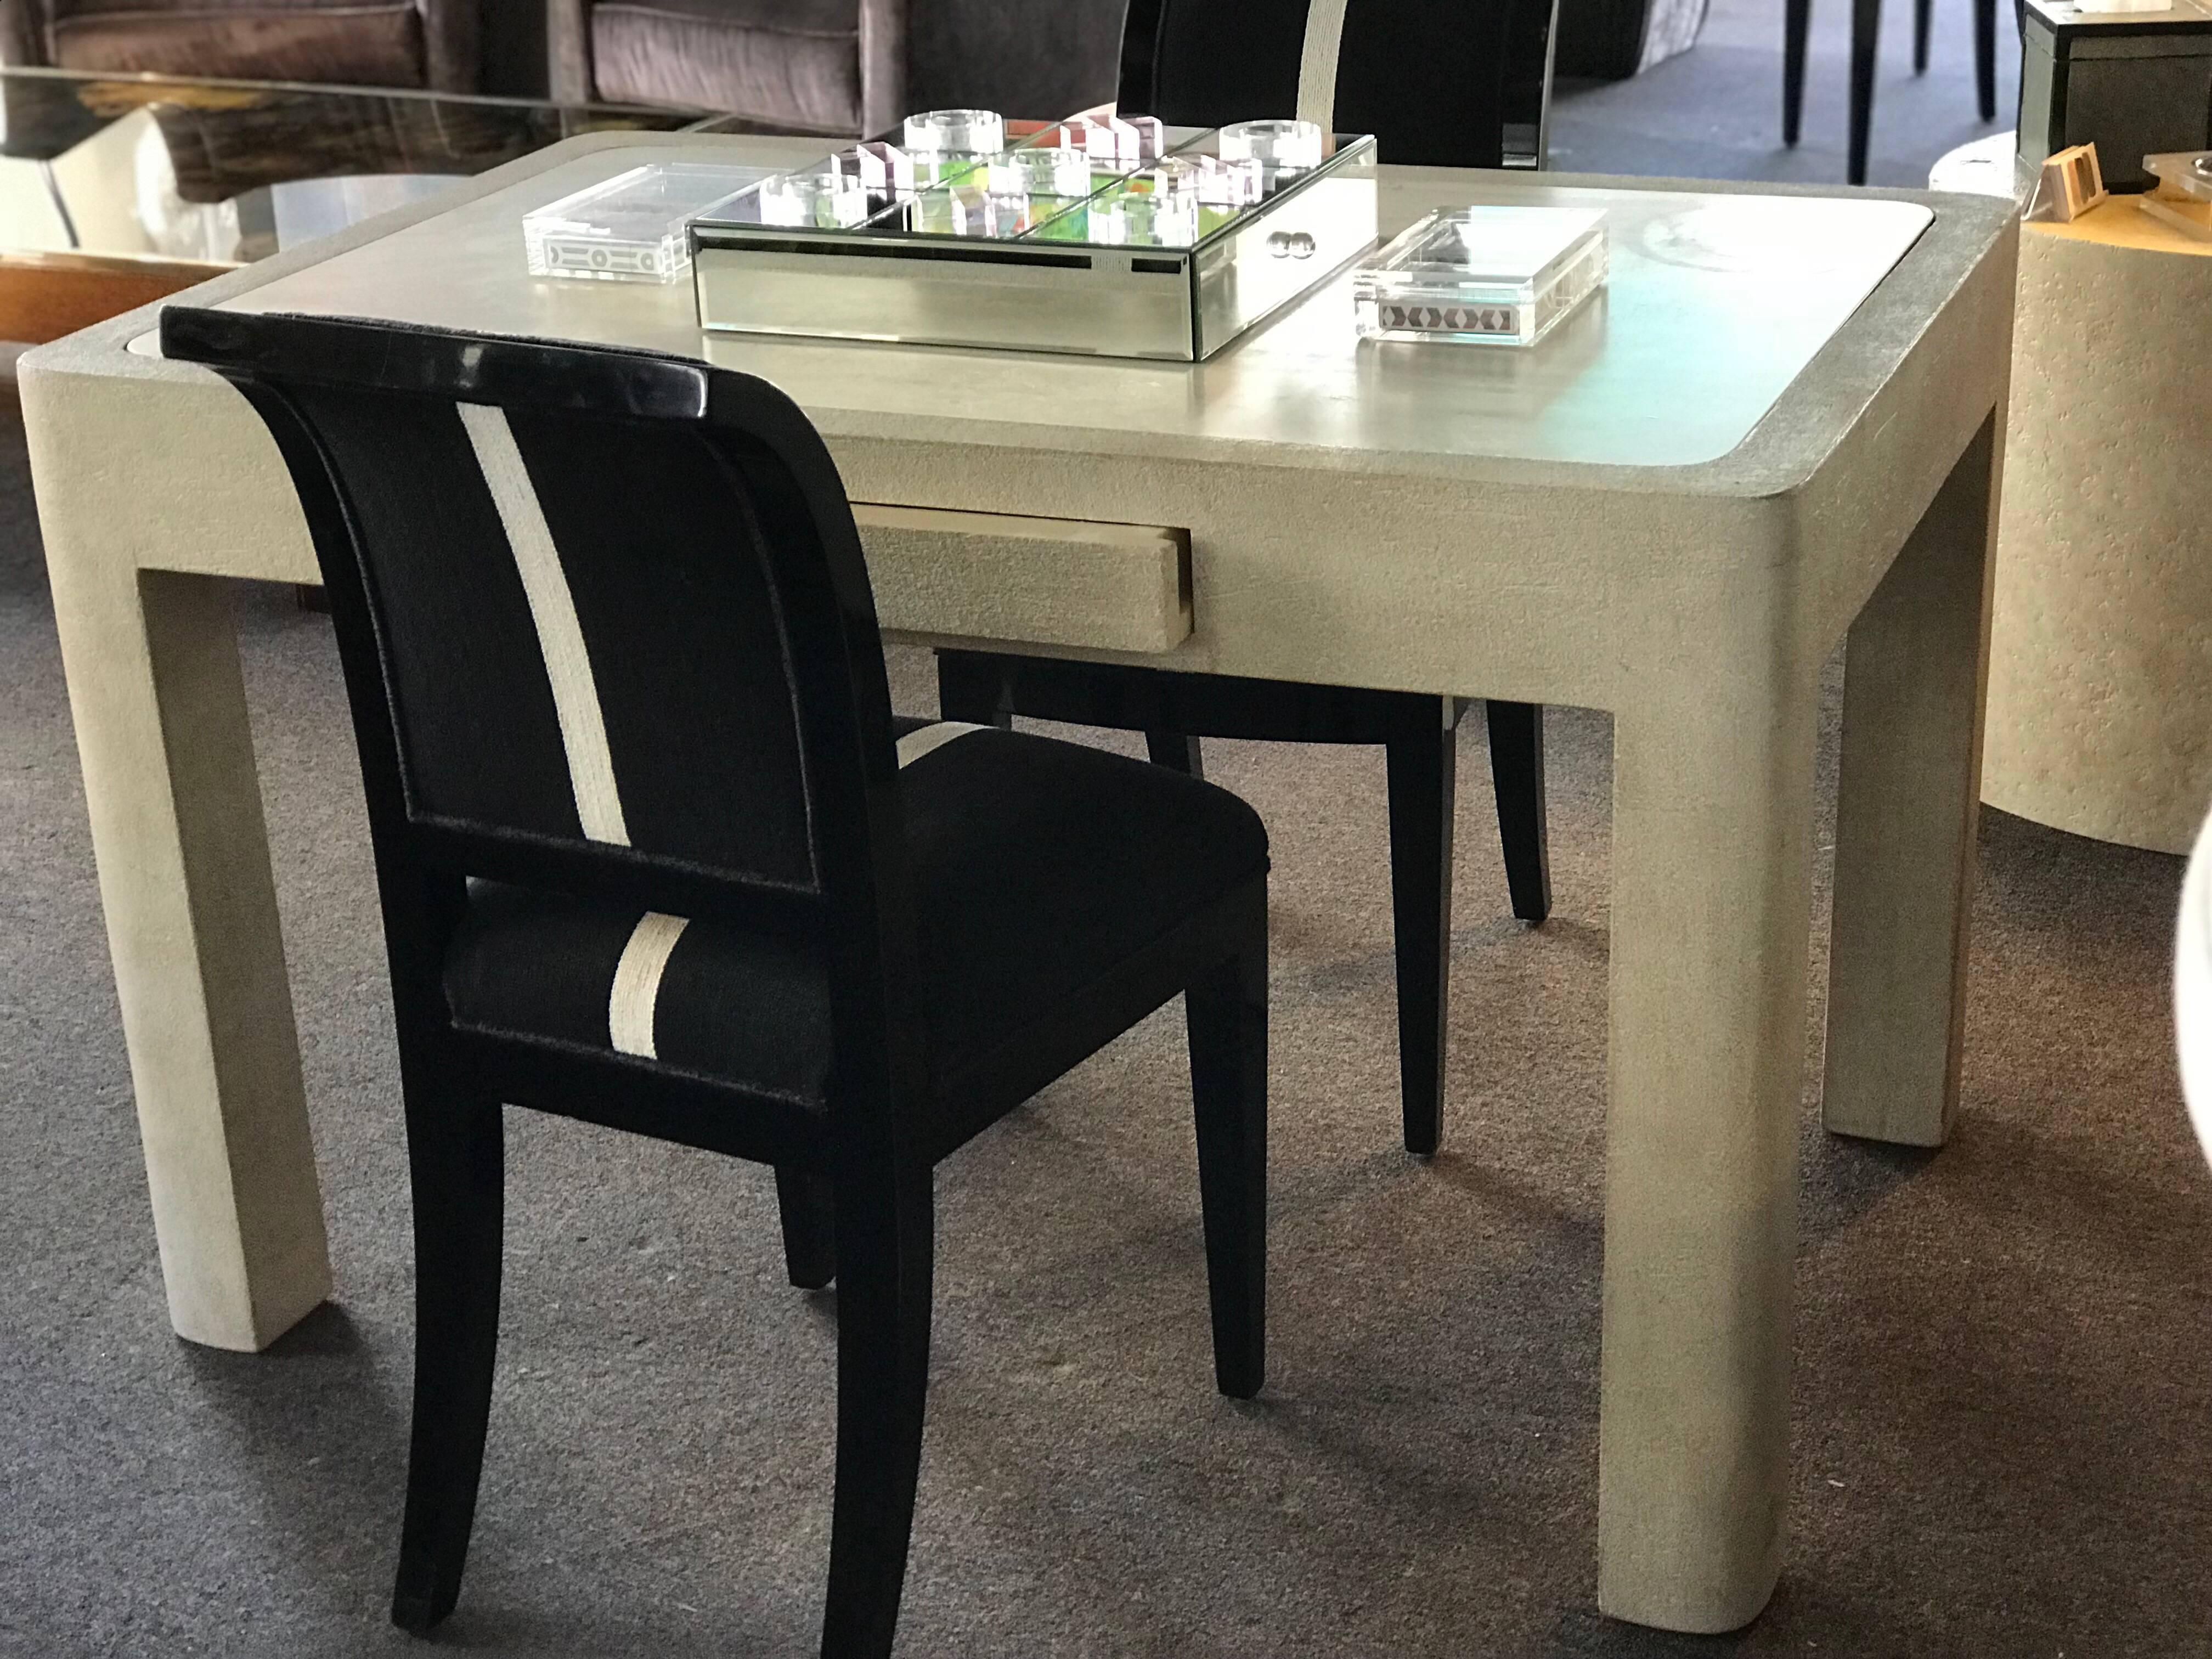 A custom one of a kind game table from the Rancho Mirage estate of Barbara Sinatra. This beautiful wood base has a plaster look finish, topped off with a beautiful Italian Travertine. Very much in the style of Karl Springer, who also had done some